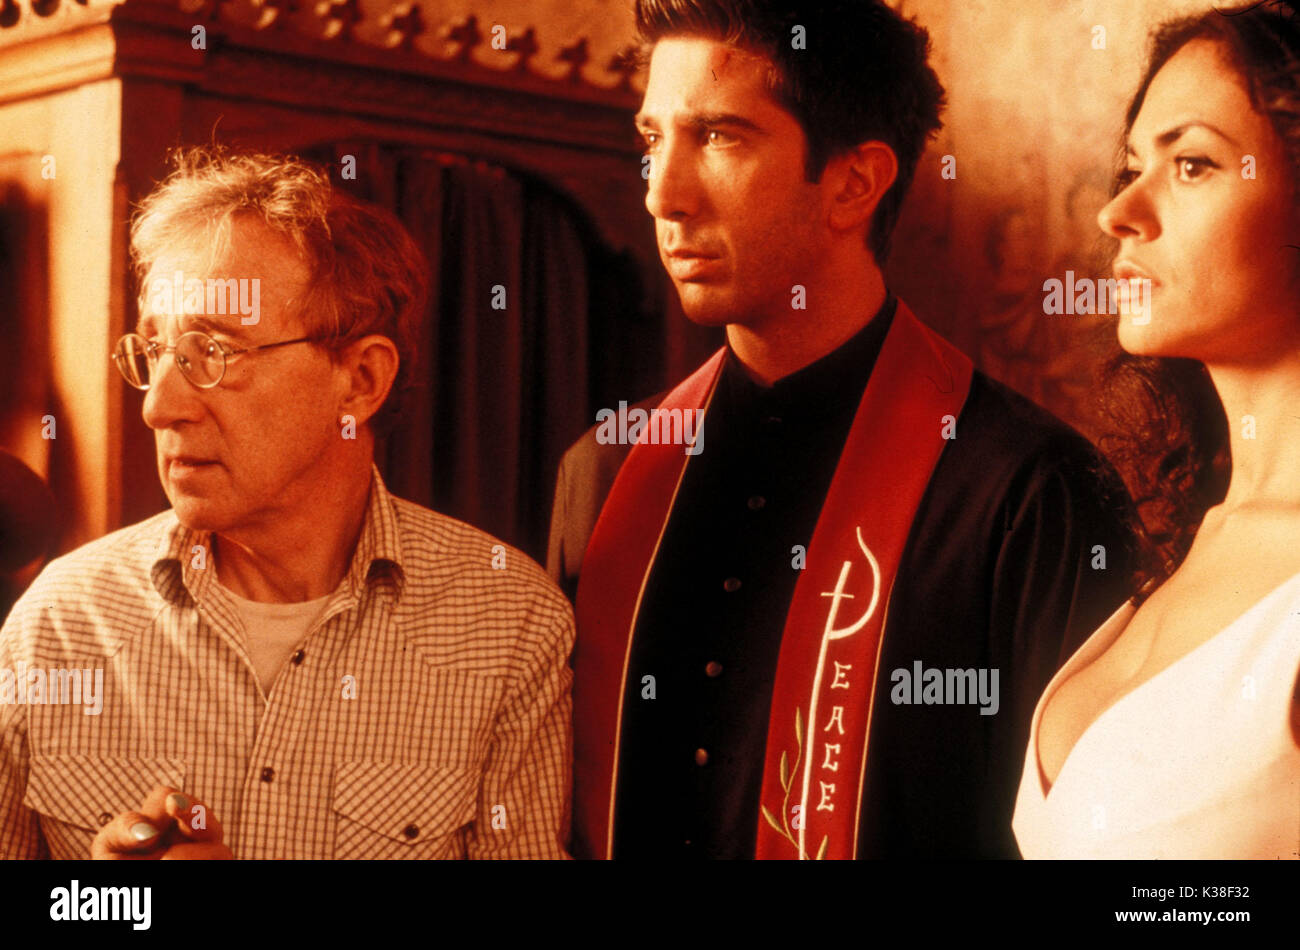 PICKING UP THE PIECES WOODY ALLEN, DAVID SCHWIMMER AND MARIA GRAZIA CUCINOTTA RELEASE BY COMALA FILMS PRODUCTIONS, OSTENSIBLE PORDUCTIONS AND KUSHNER-LOCKE COMPANY     Date: 1996 Stock Photo